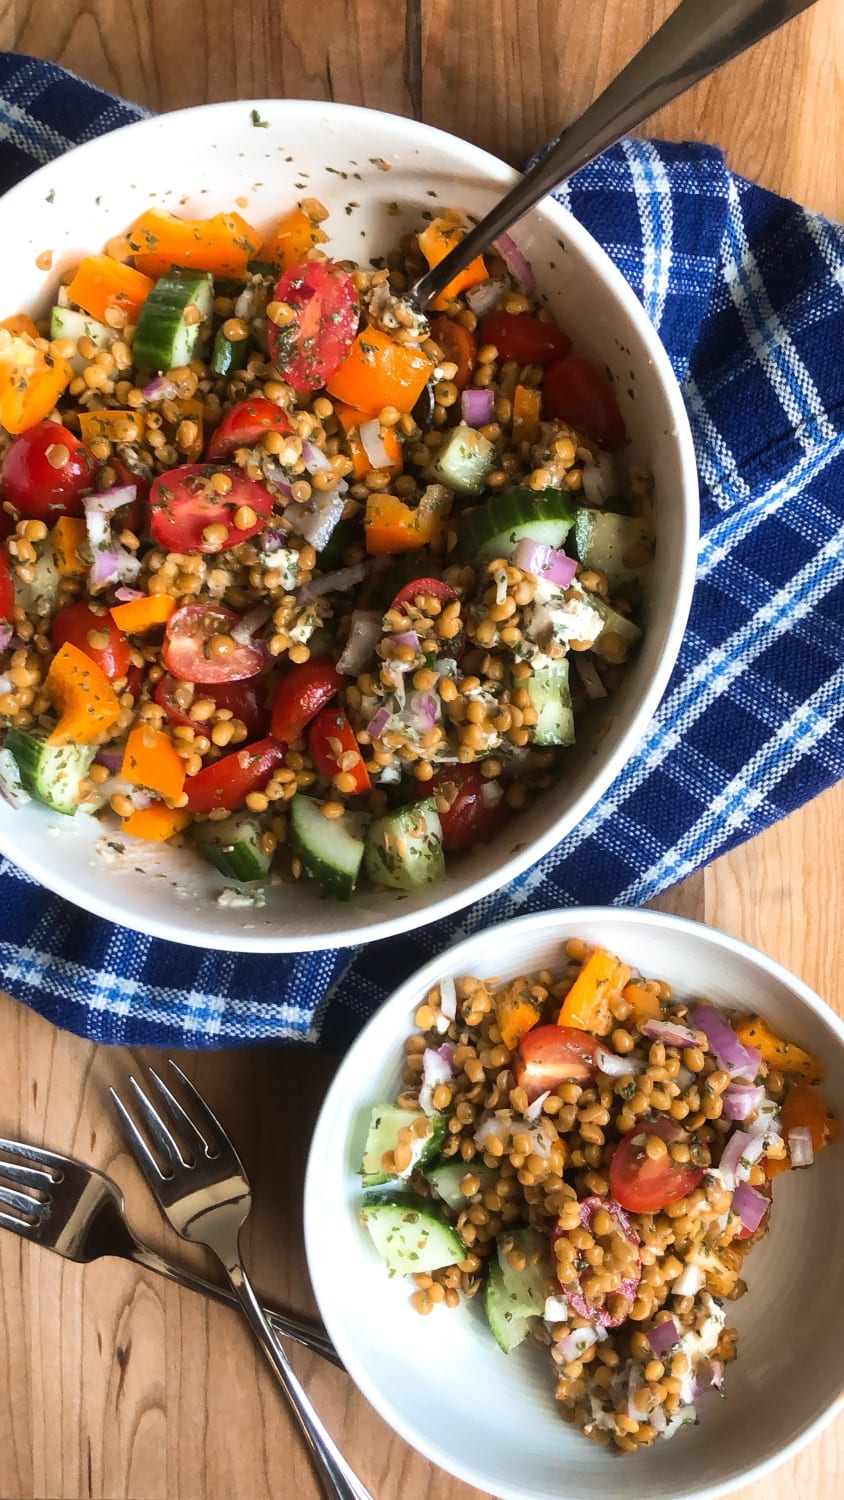 Lentil Mediterranean Salad! So excited for the warmer weather and all the fresh, seasonal veggies that come with it ☺️